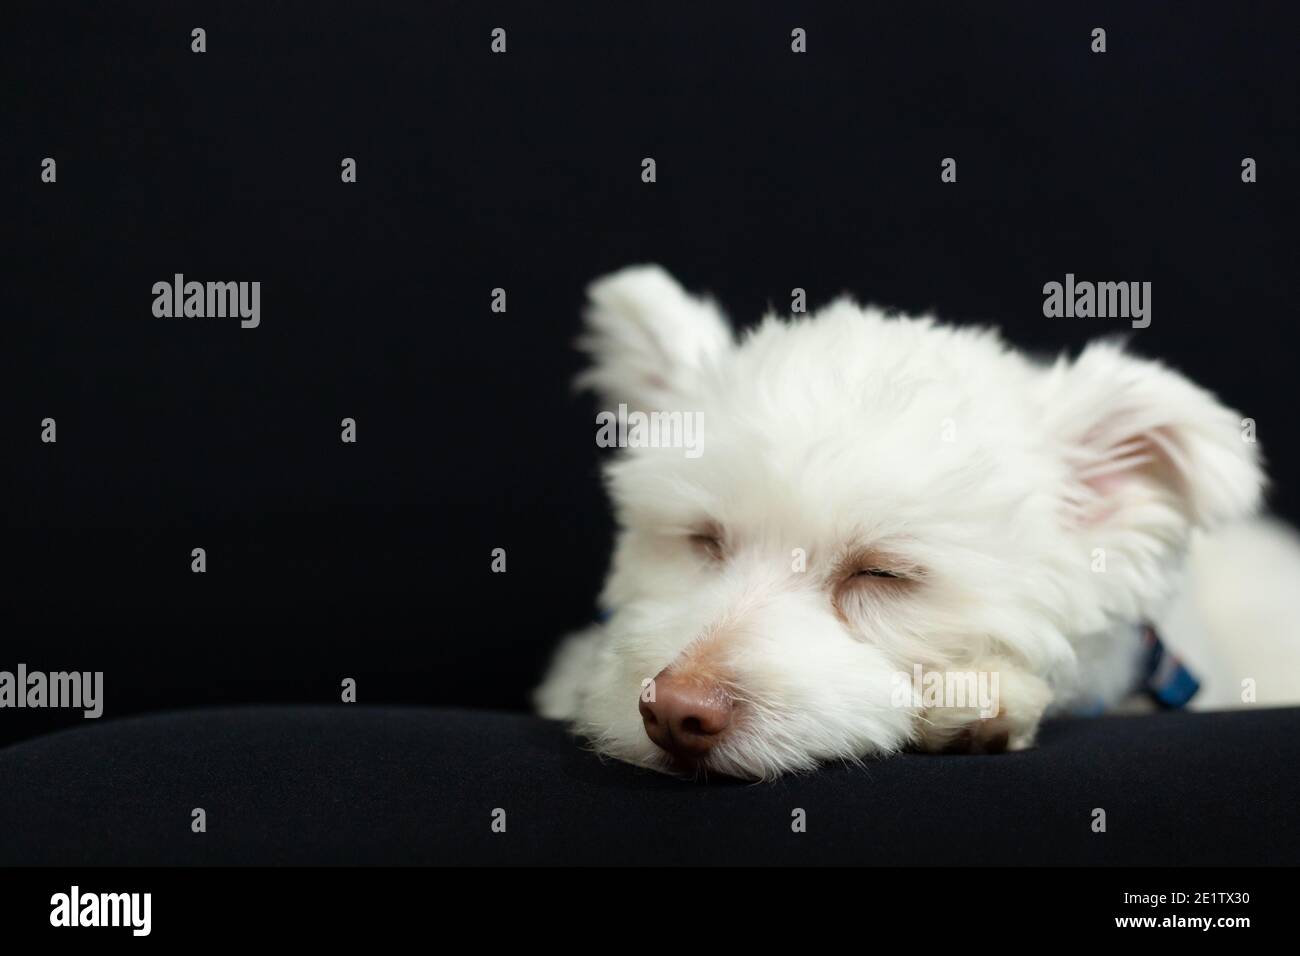 A White Mixed Breed Dog On A Black Background The Dog Is Predominantly Chihuahua Japanese Spitz And Standard Poodle Image Has A Shallow Depth Of F Stock Photo Alamy